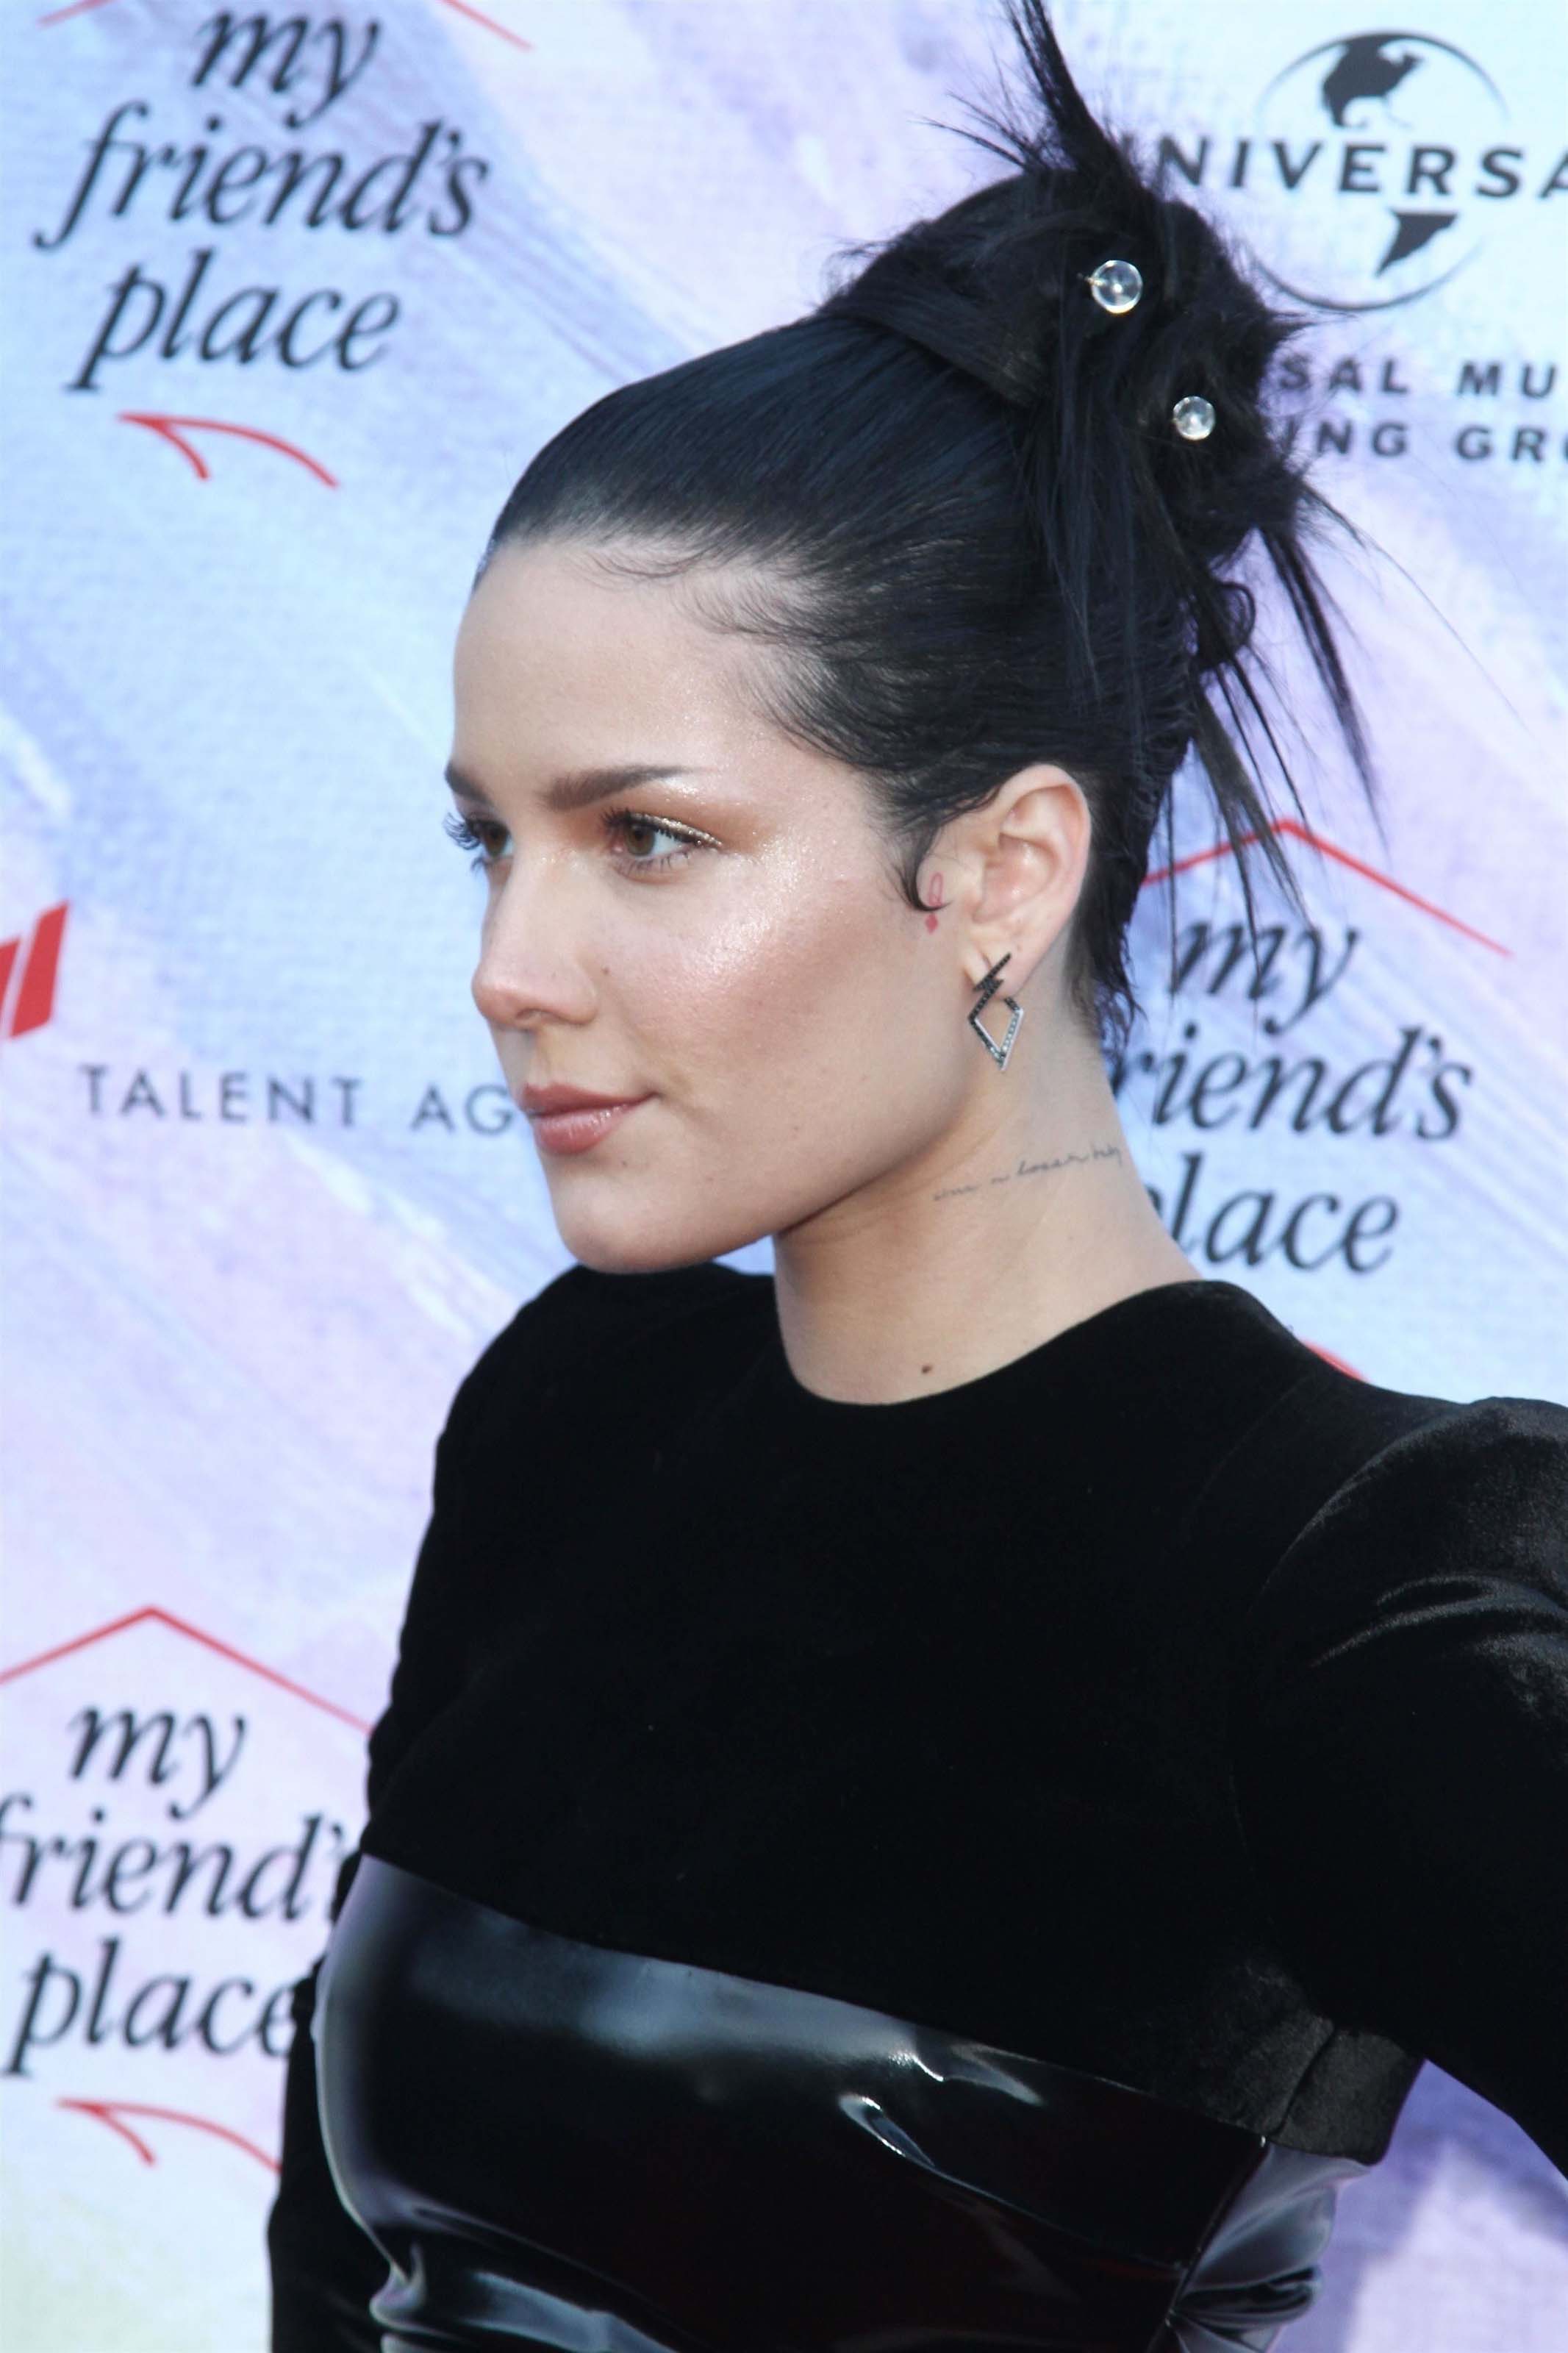 Halsey attends Ending Youth Homelessness: A Benefit For My Friend’s Place Gala